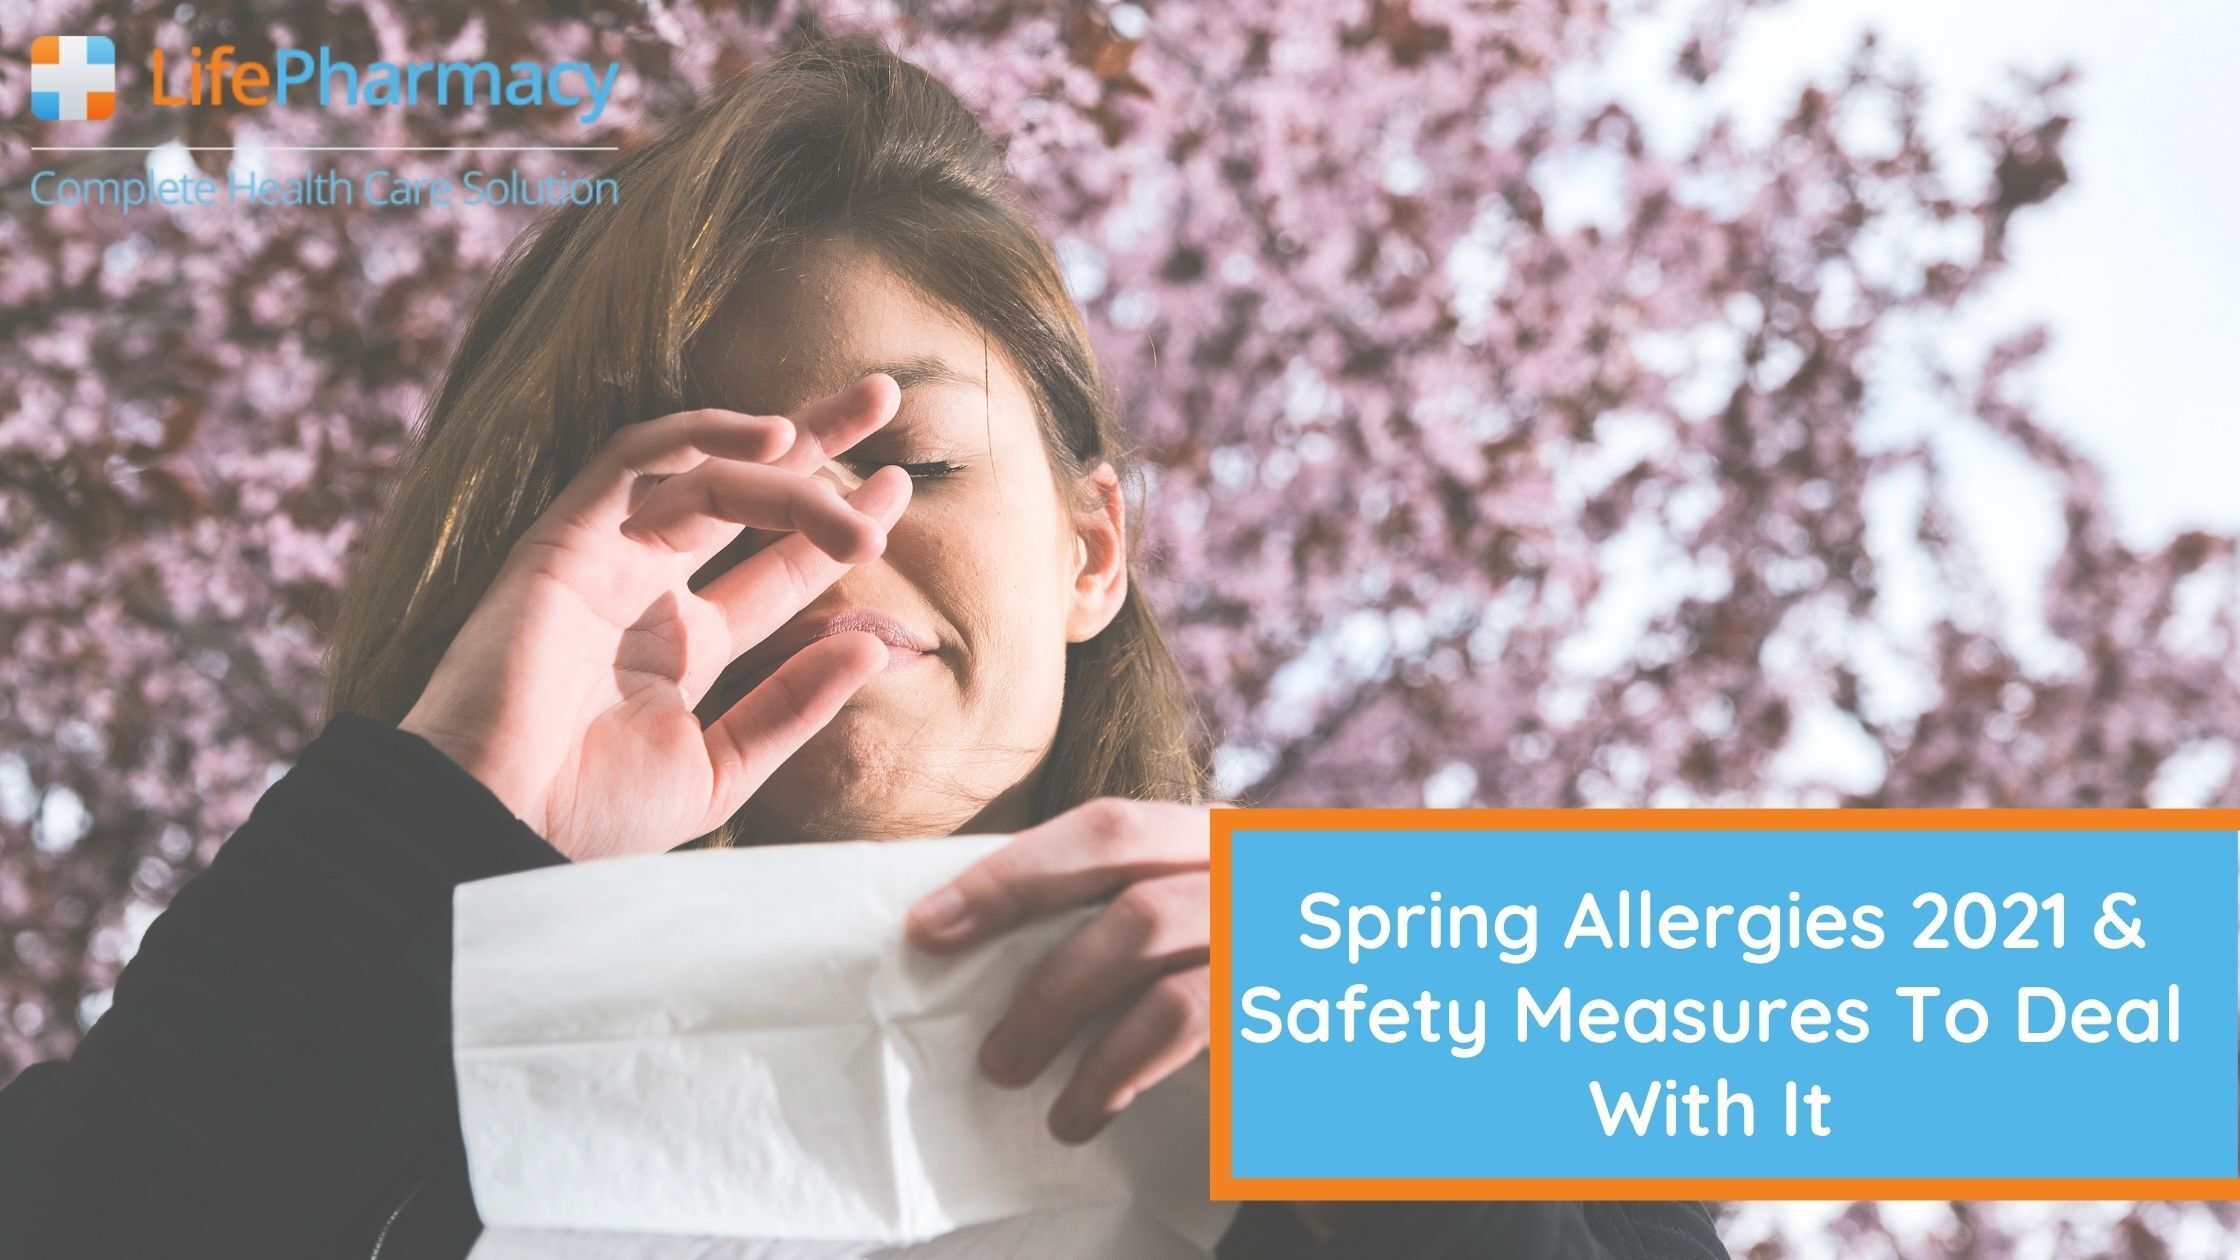 Spring Allergies 2021 & Safety Measures To Deal With It